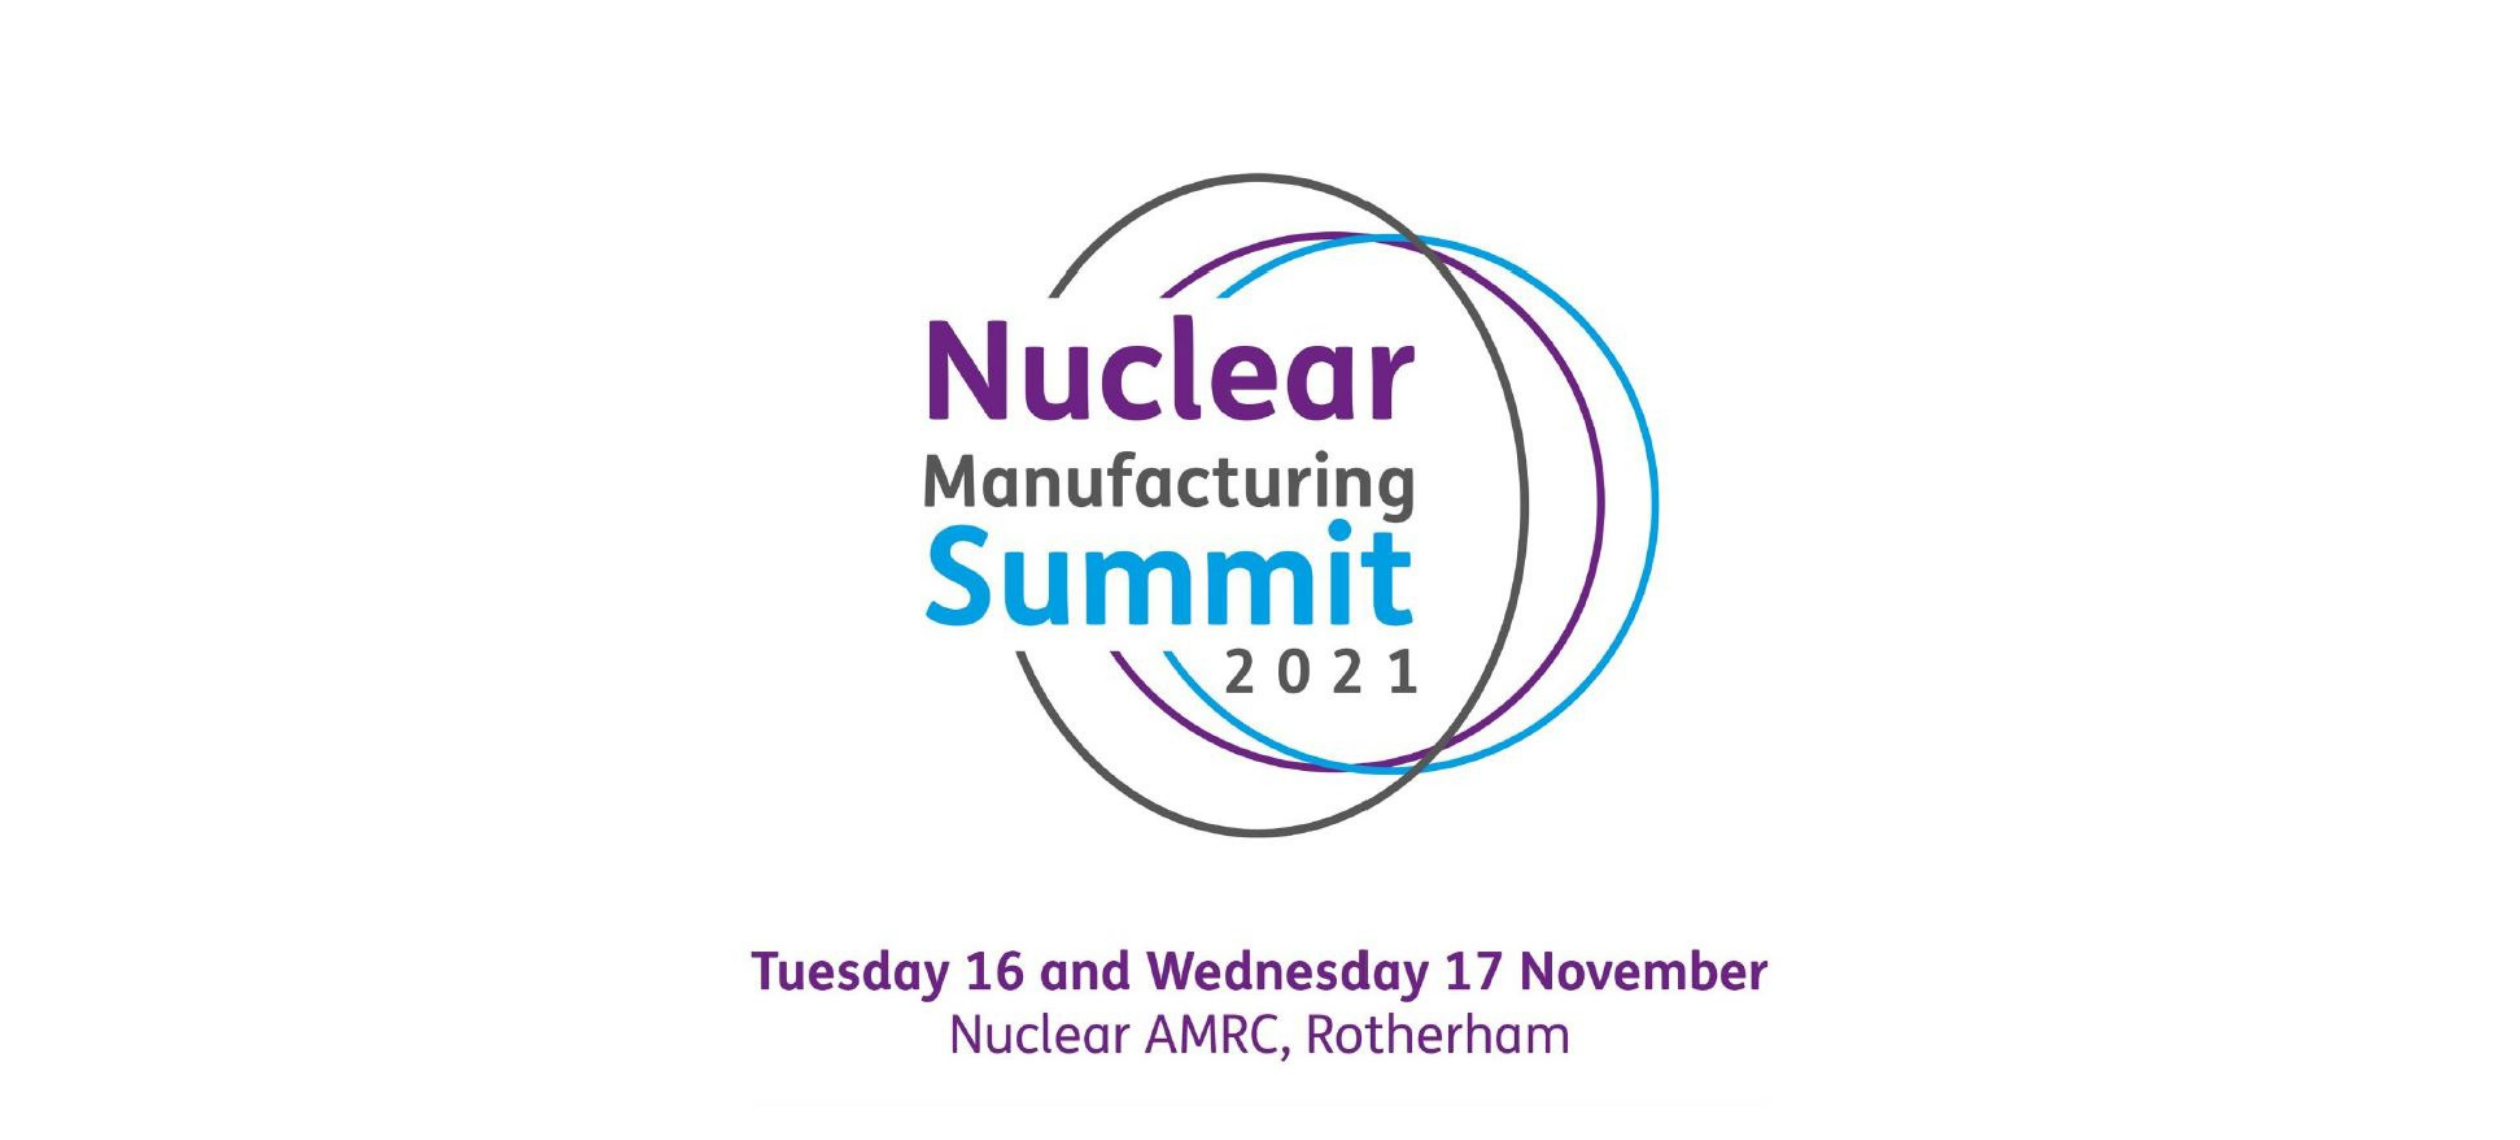 Wozair to Exhibit at the Nuclear Manufacturing Summit 2021